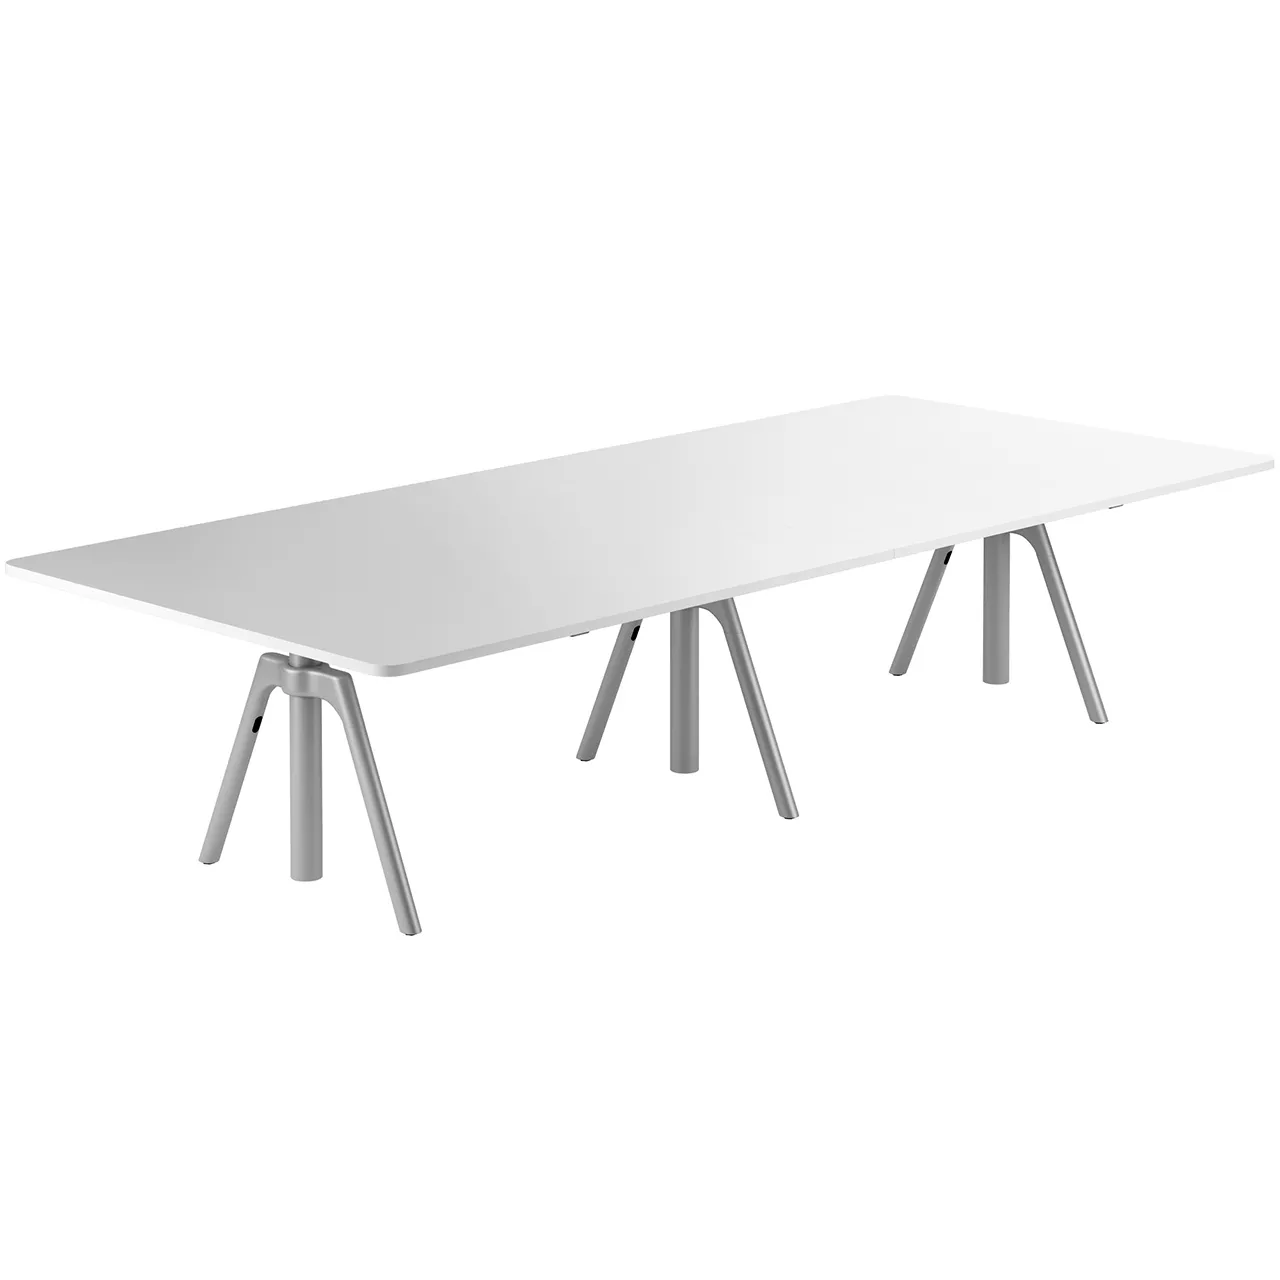 Office – talo-you-conference-table-320-by-konigneurath